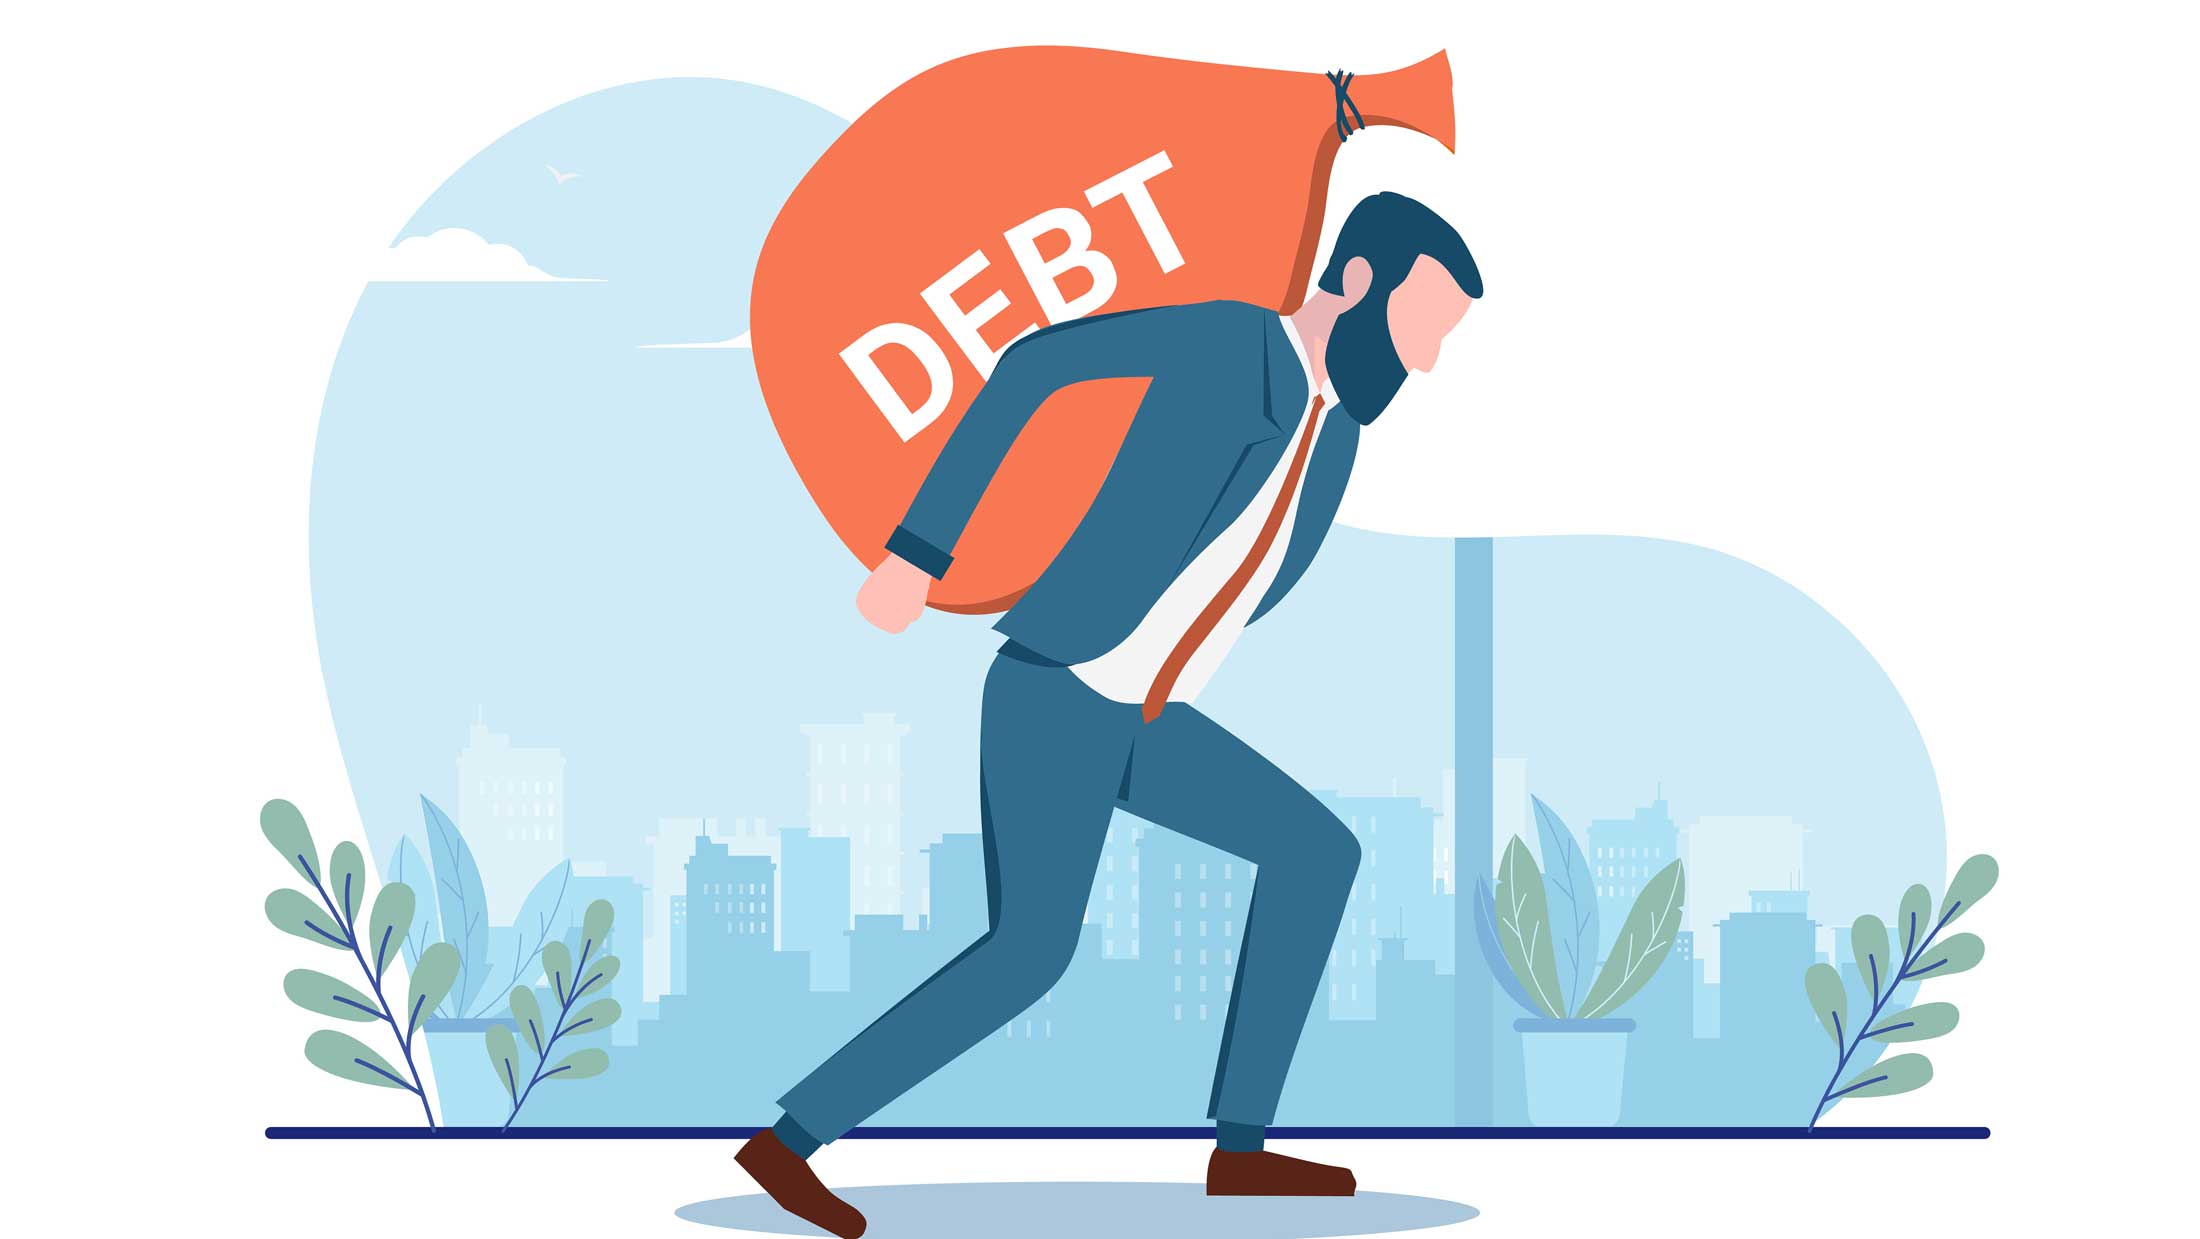 Illustration of a business man carrying a huge sack on his back labeled "DEBT"